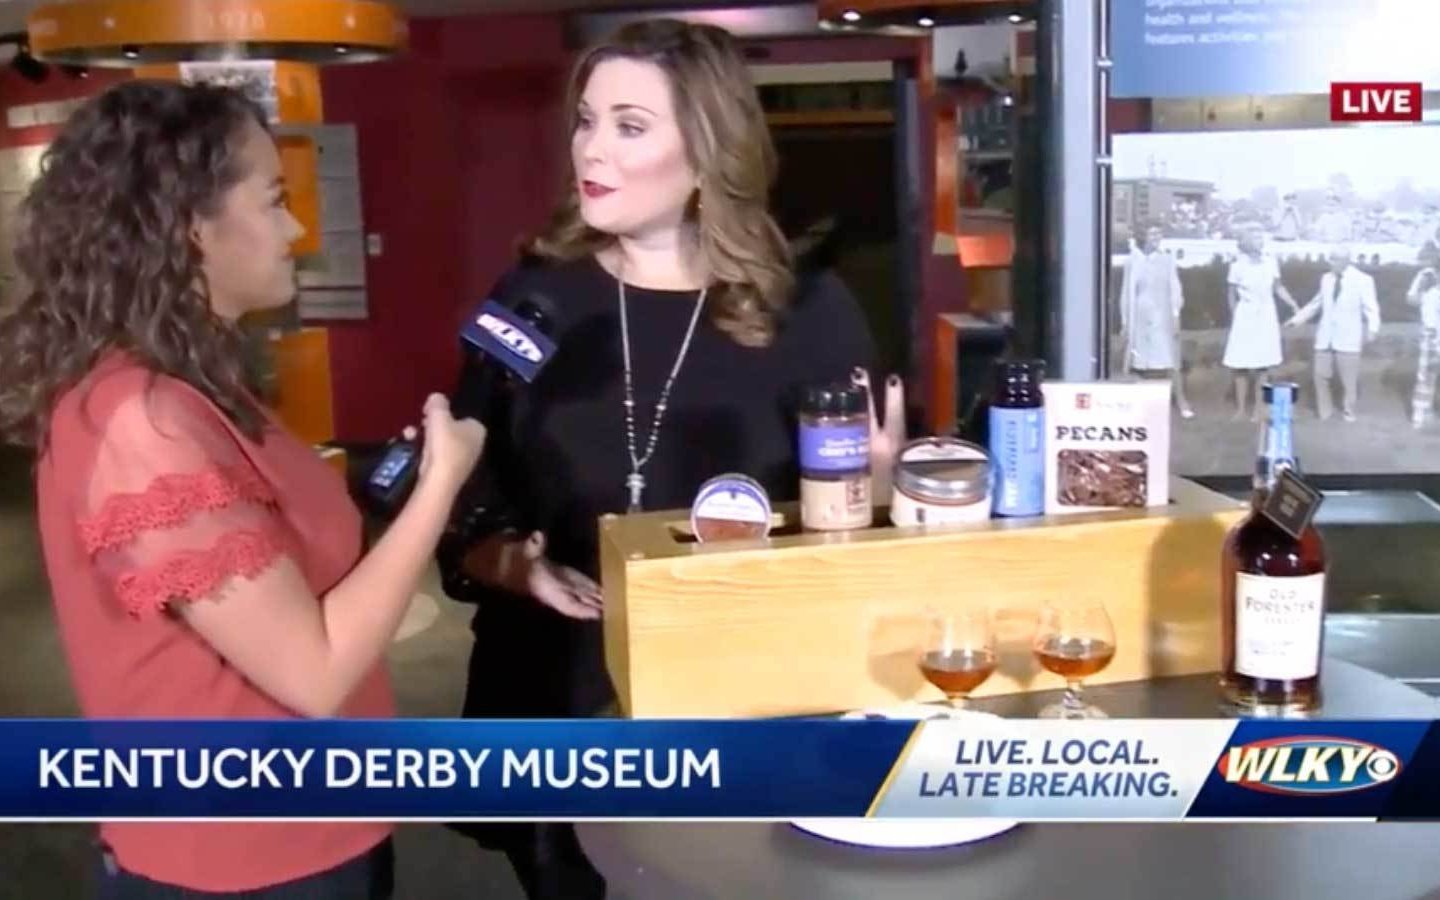 Kentucky Derby Museum hosting event for bourbon lovers